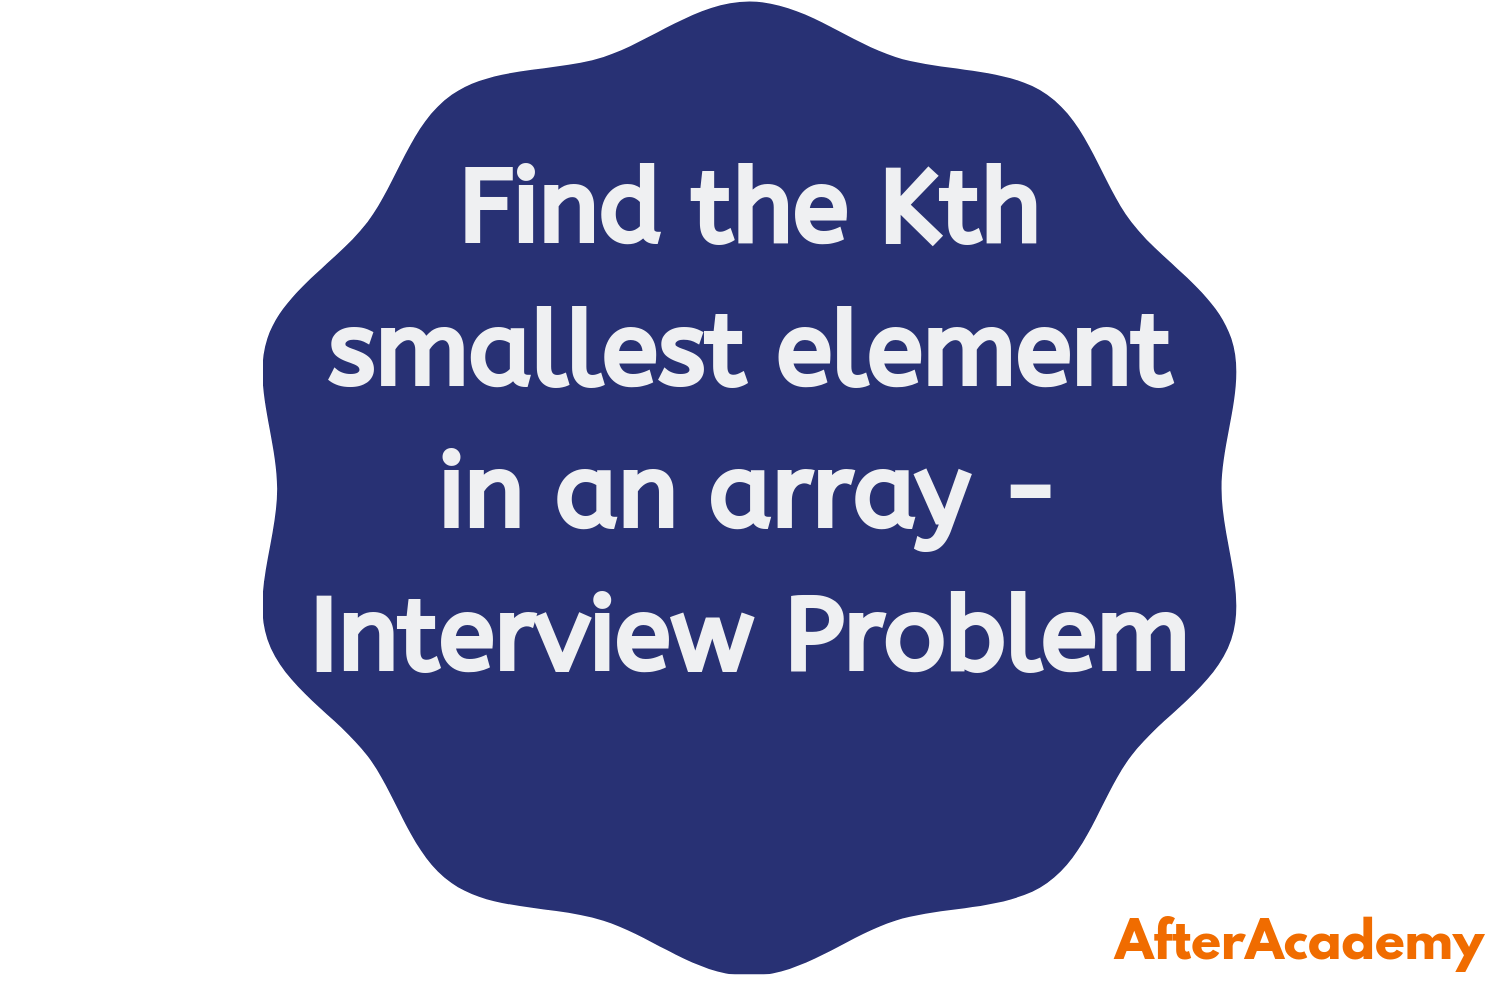 Find the kth smallest element in an array